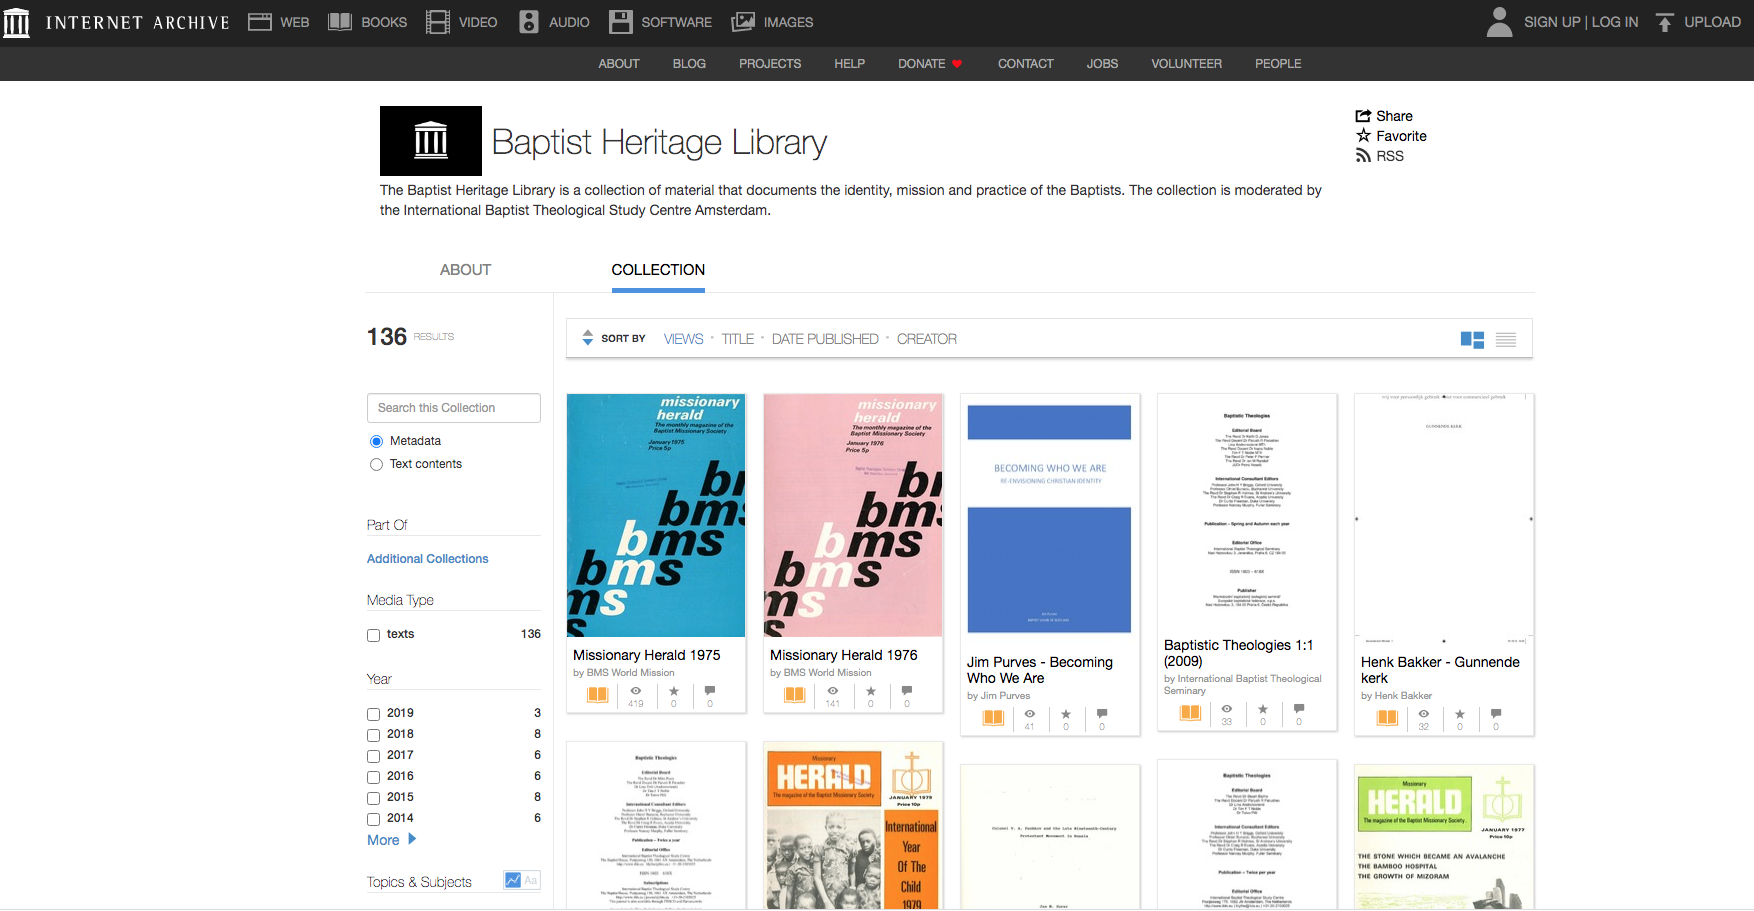 IBTS Launches Online Baptist Heritage Library